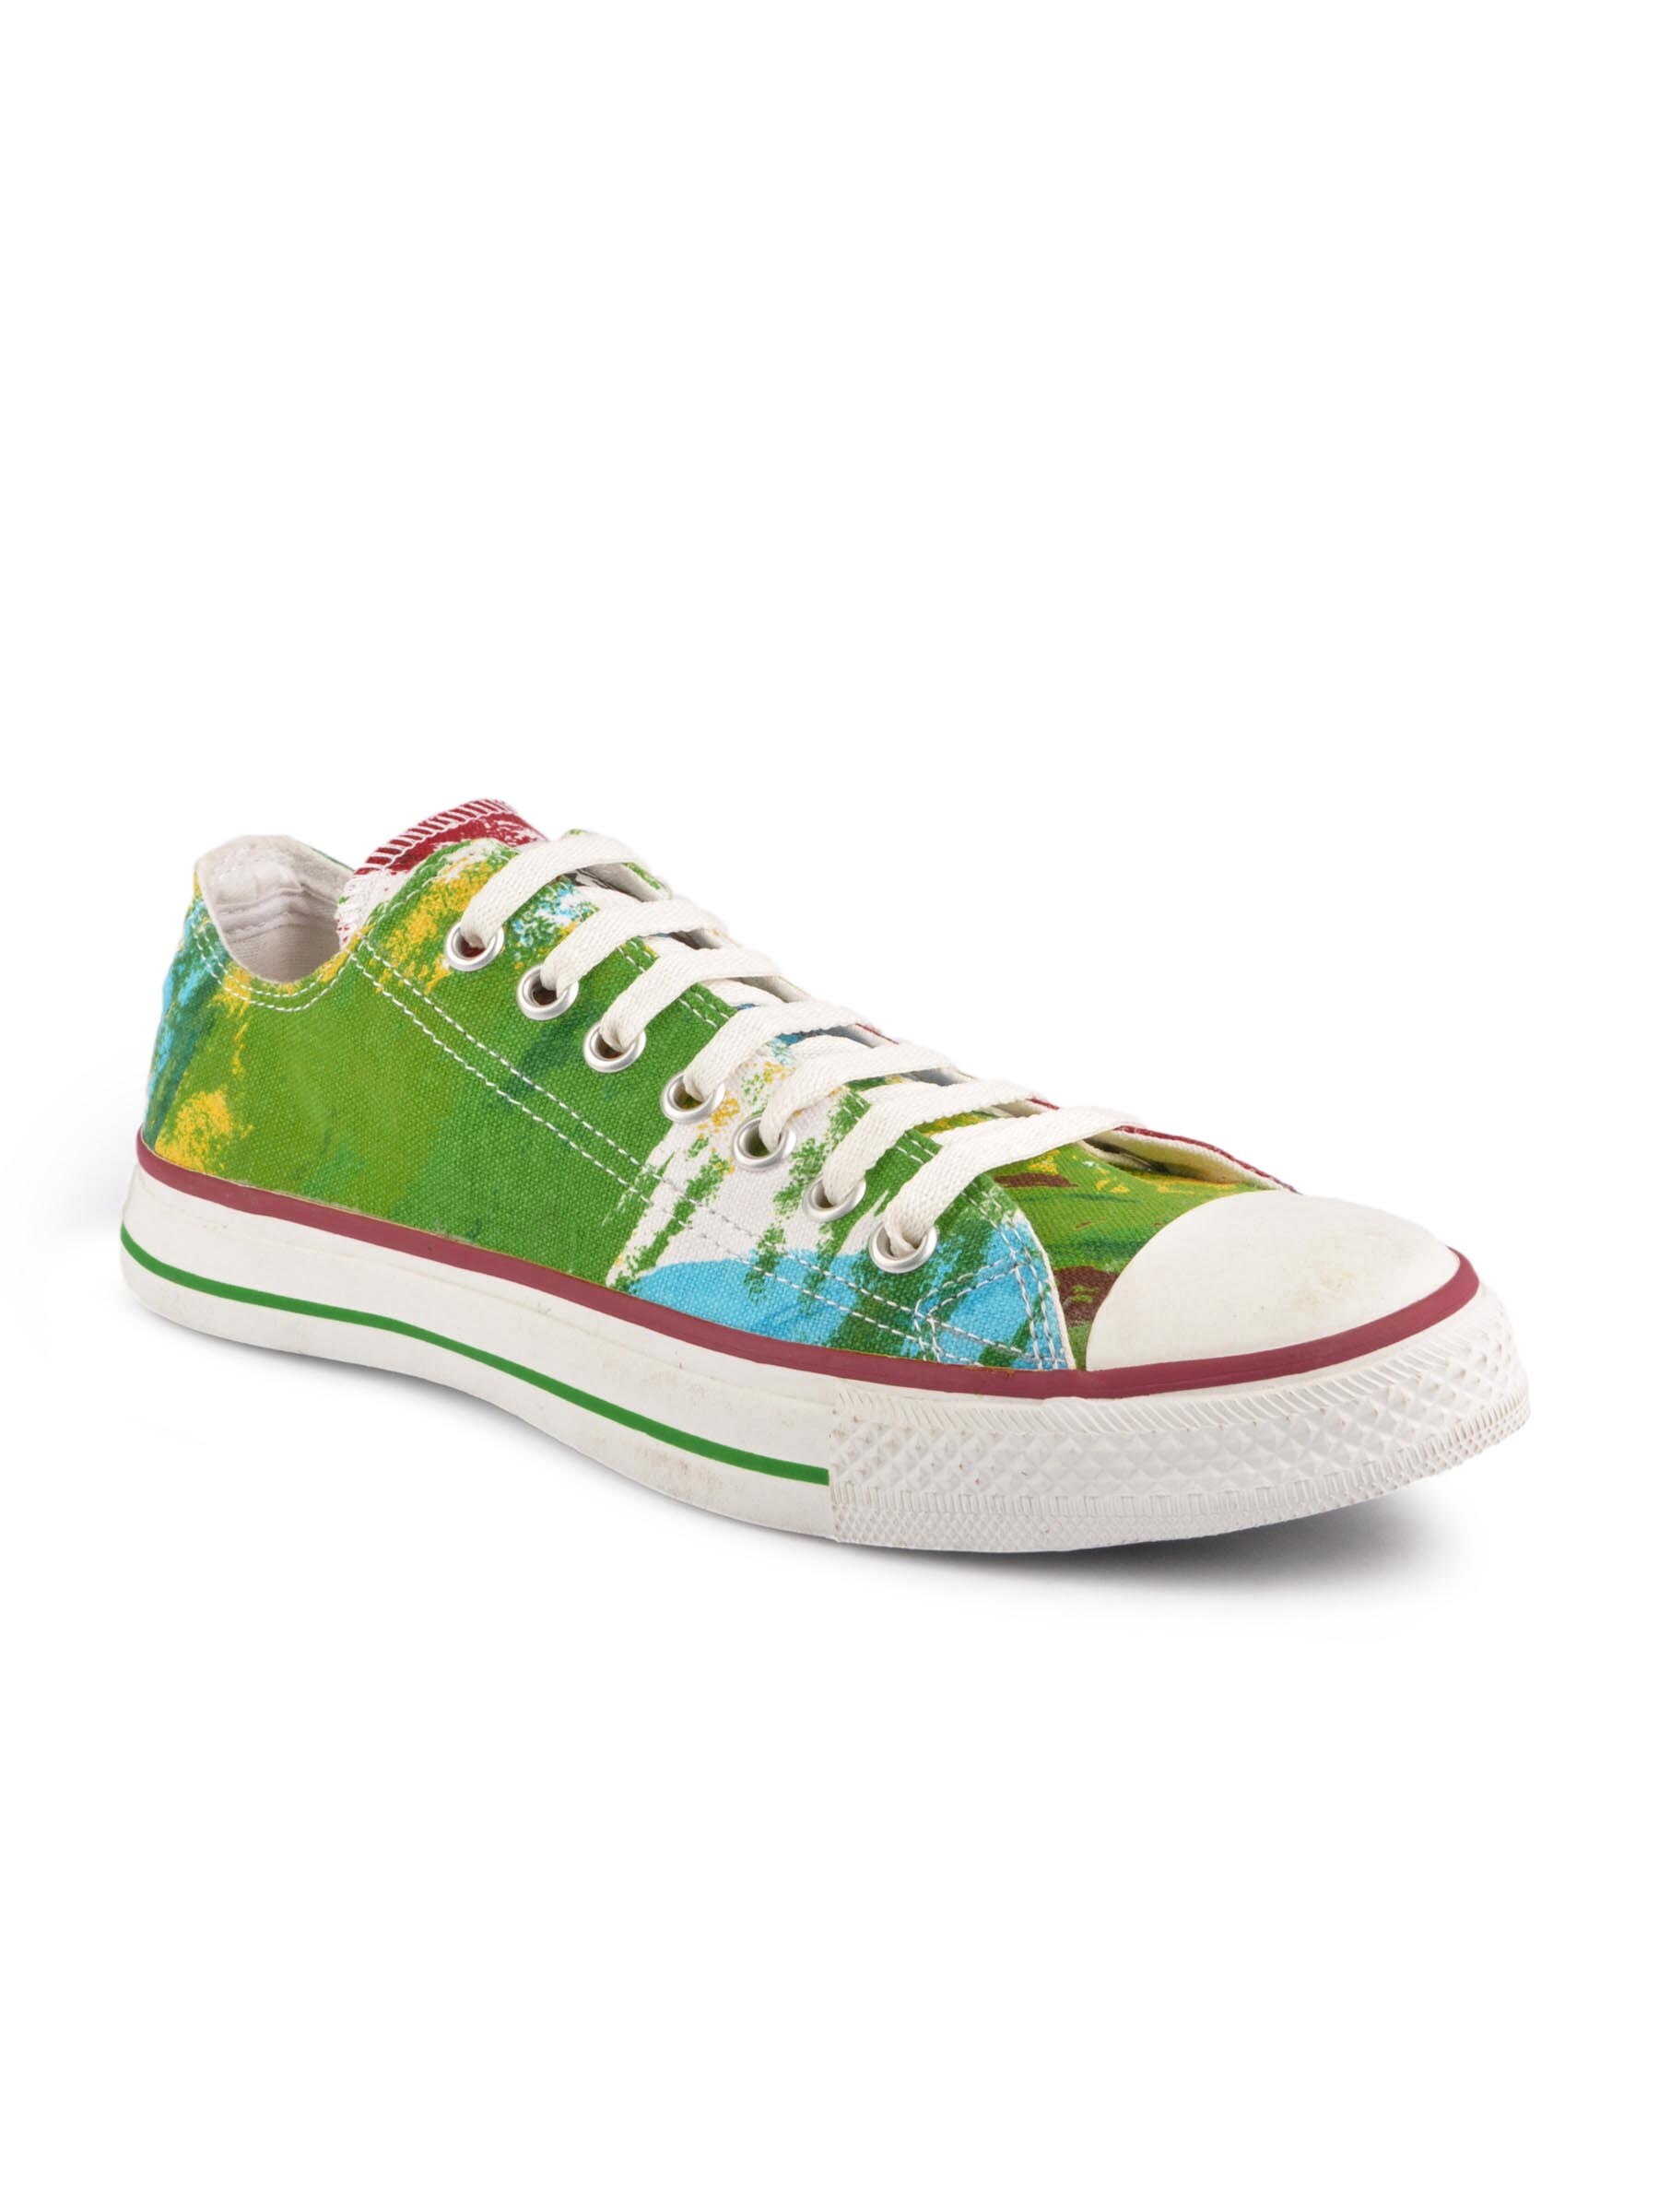 Converse Unisex Brush Print Green Casual Shoes